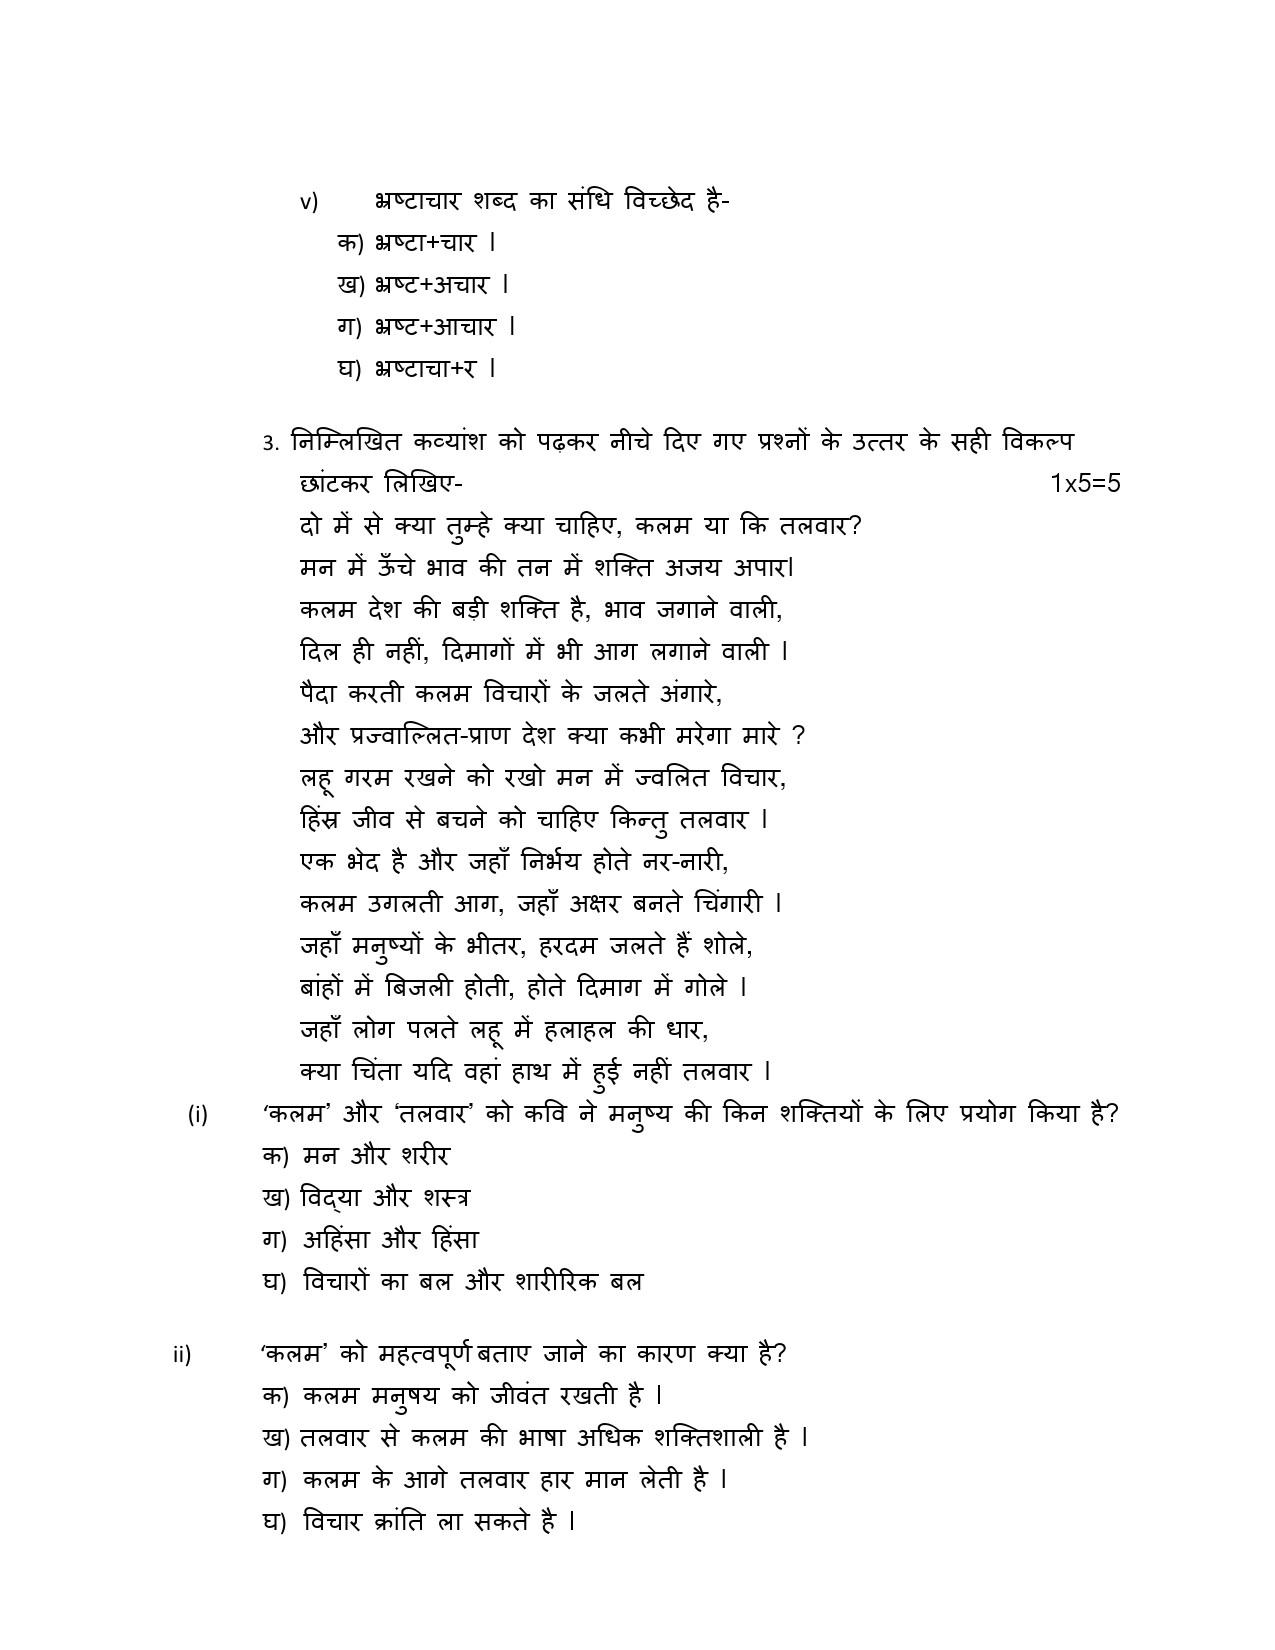 Hindi A CBSE Class X Sample Question Paper 2015 16 - Image 4